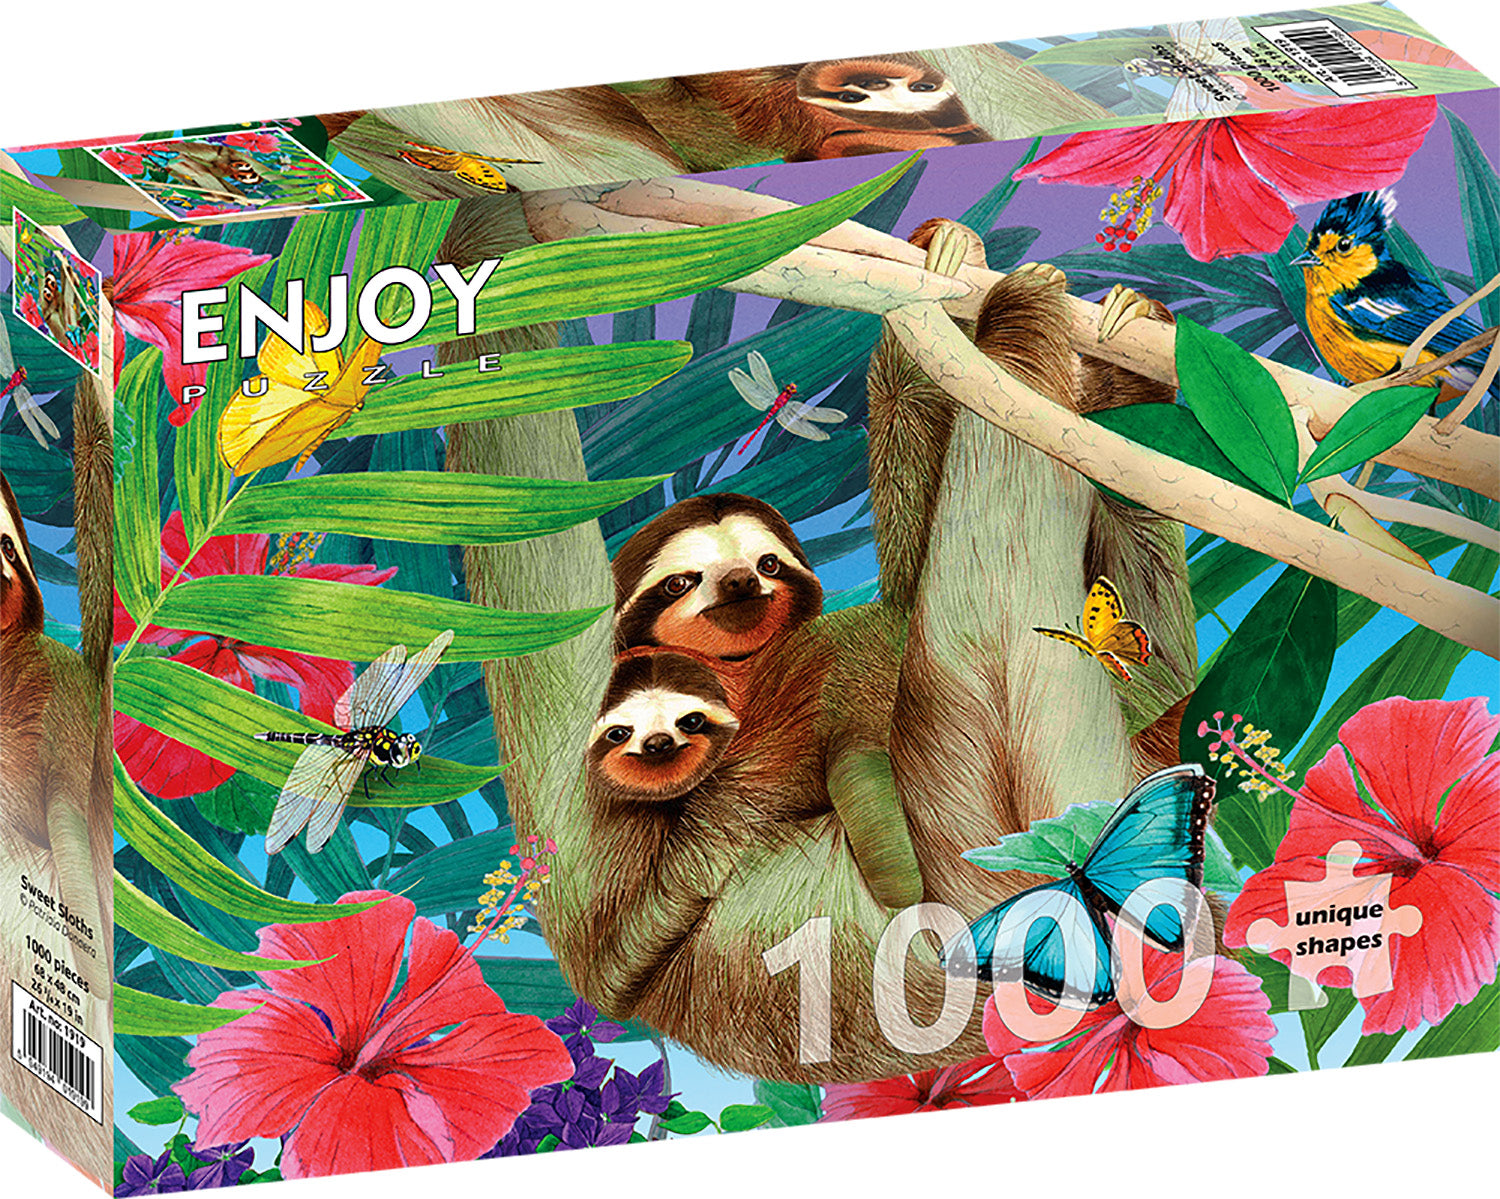 1000 Pieces Jigsaw Puzzle - Sweet Sloths